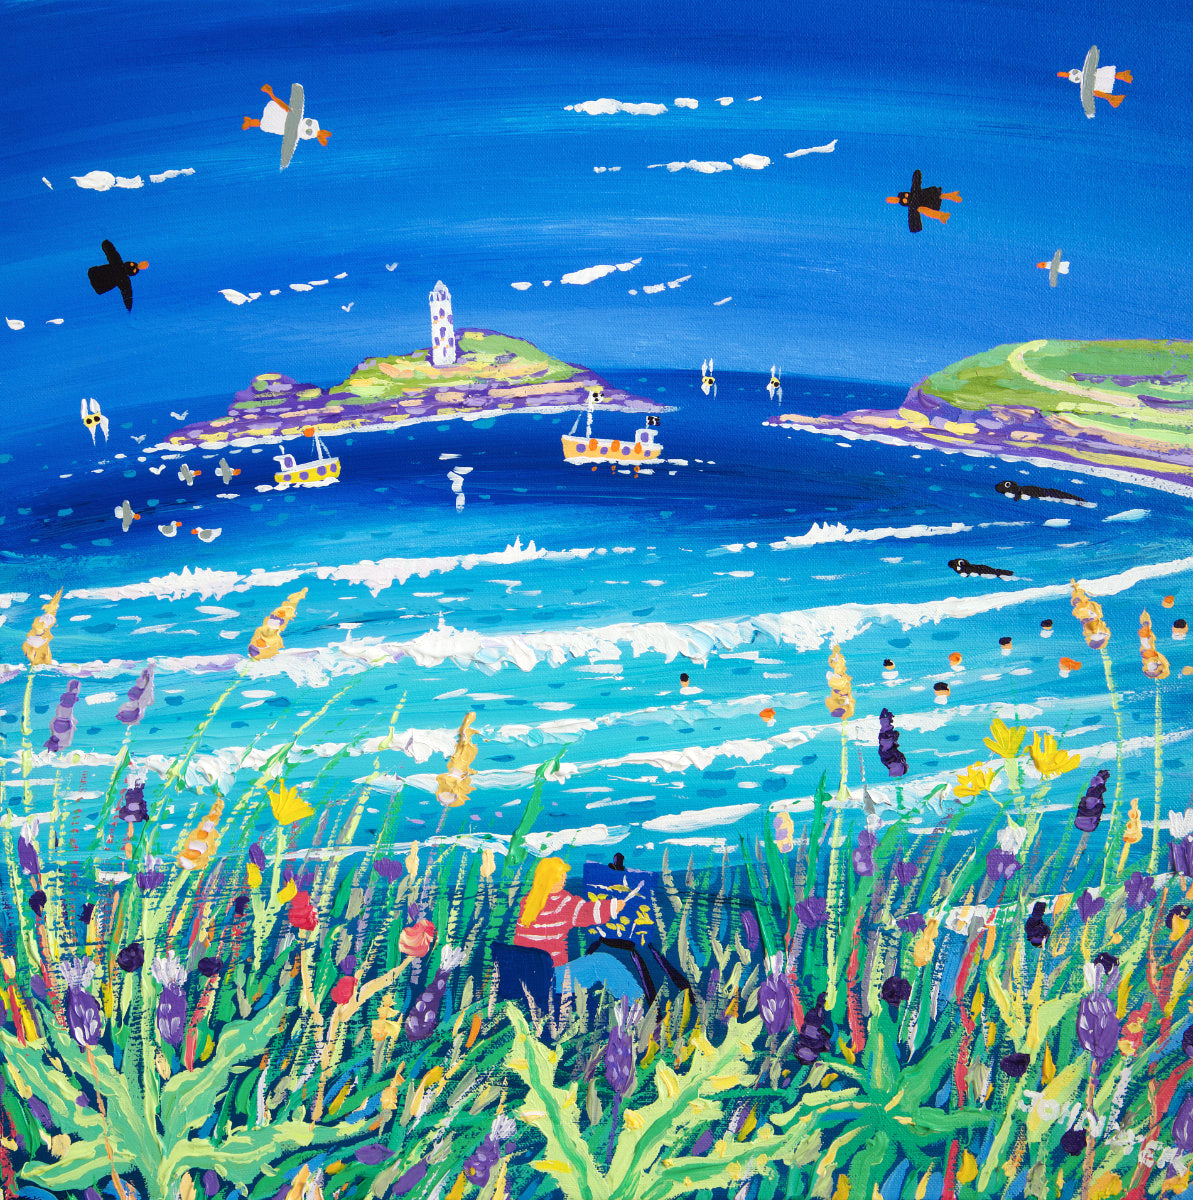 Cornwall gallery painting by John Dyer. An artist paints on the cliffs at Gwithian overlooking the beach towards Godrevy lighthouse.